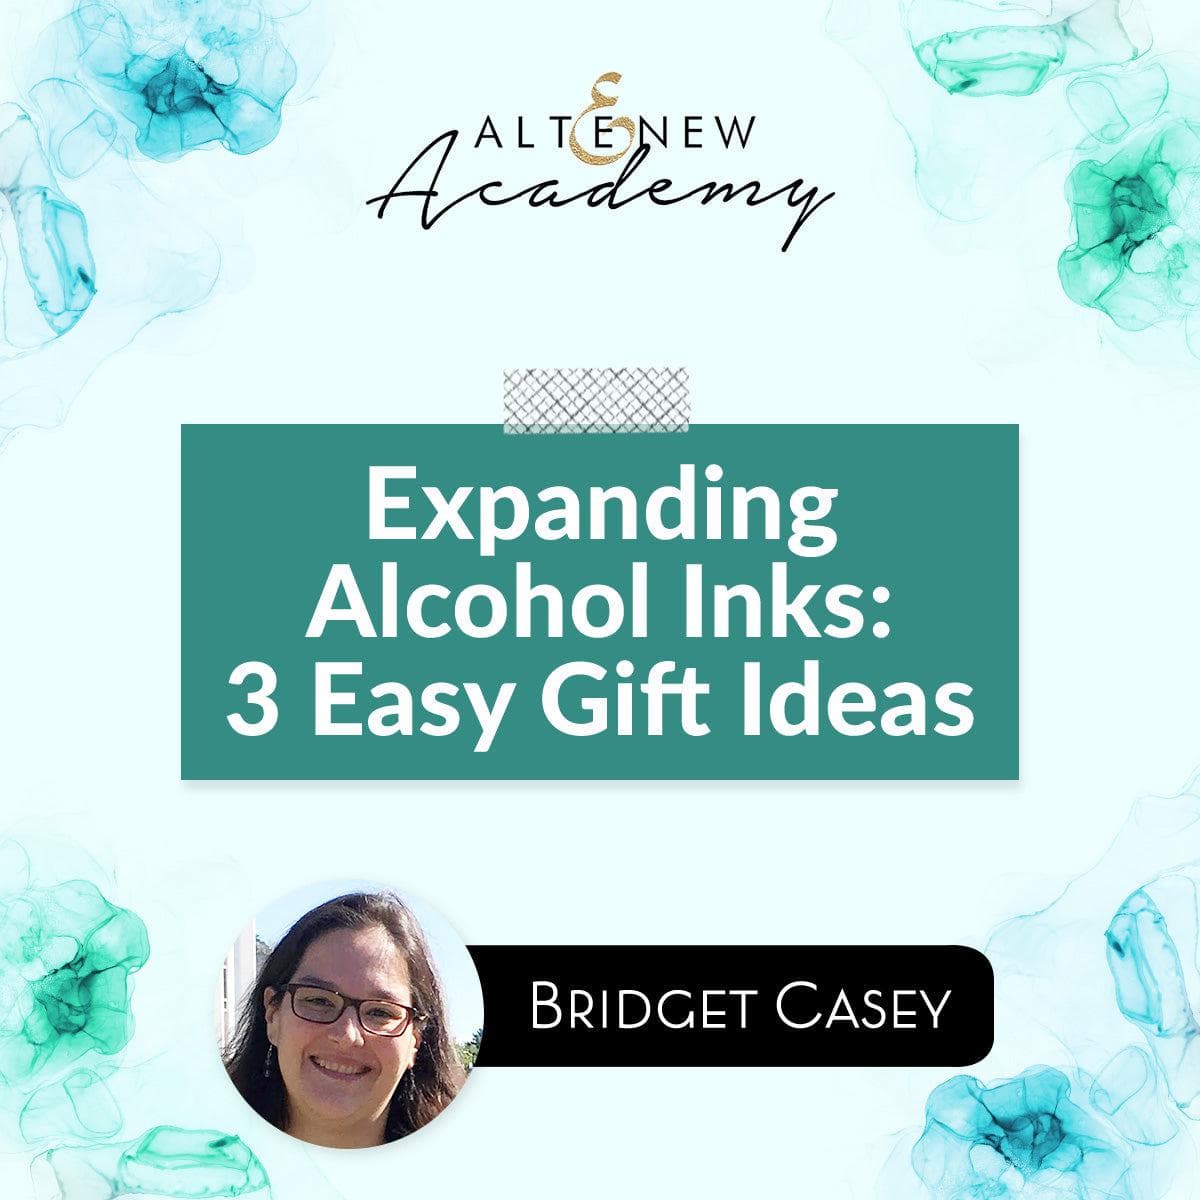 Altenew Class Expanding Alcohol Inks: 3 Easy Gift Ideas